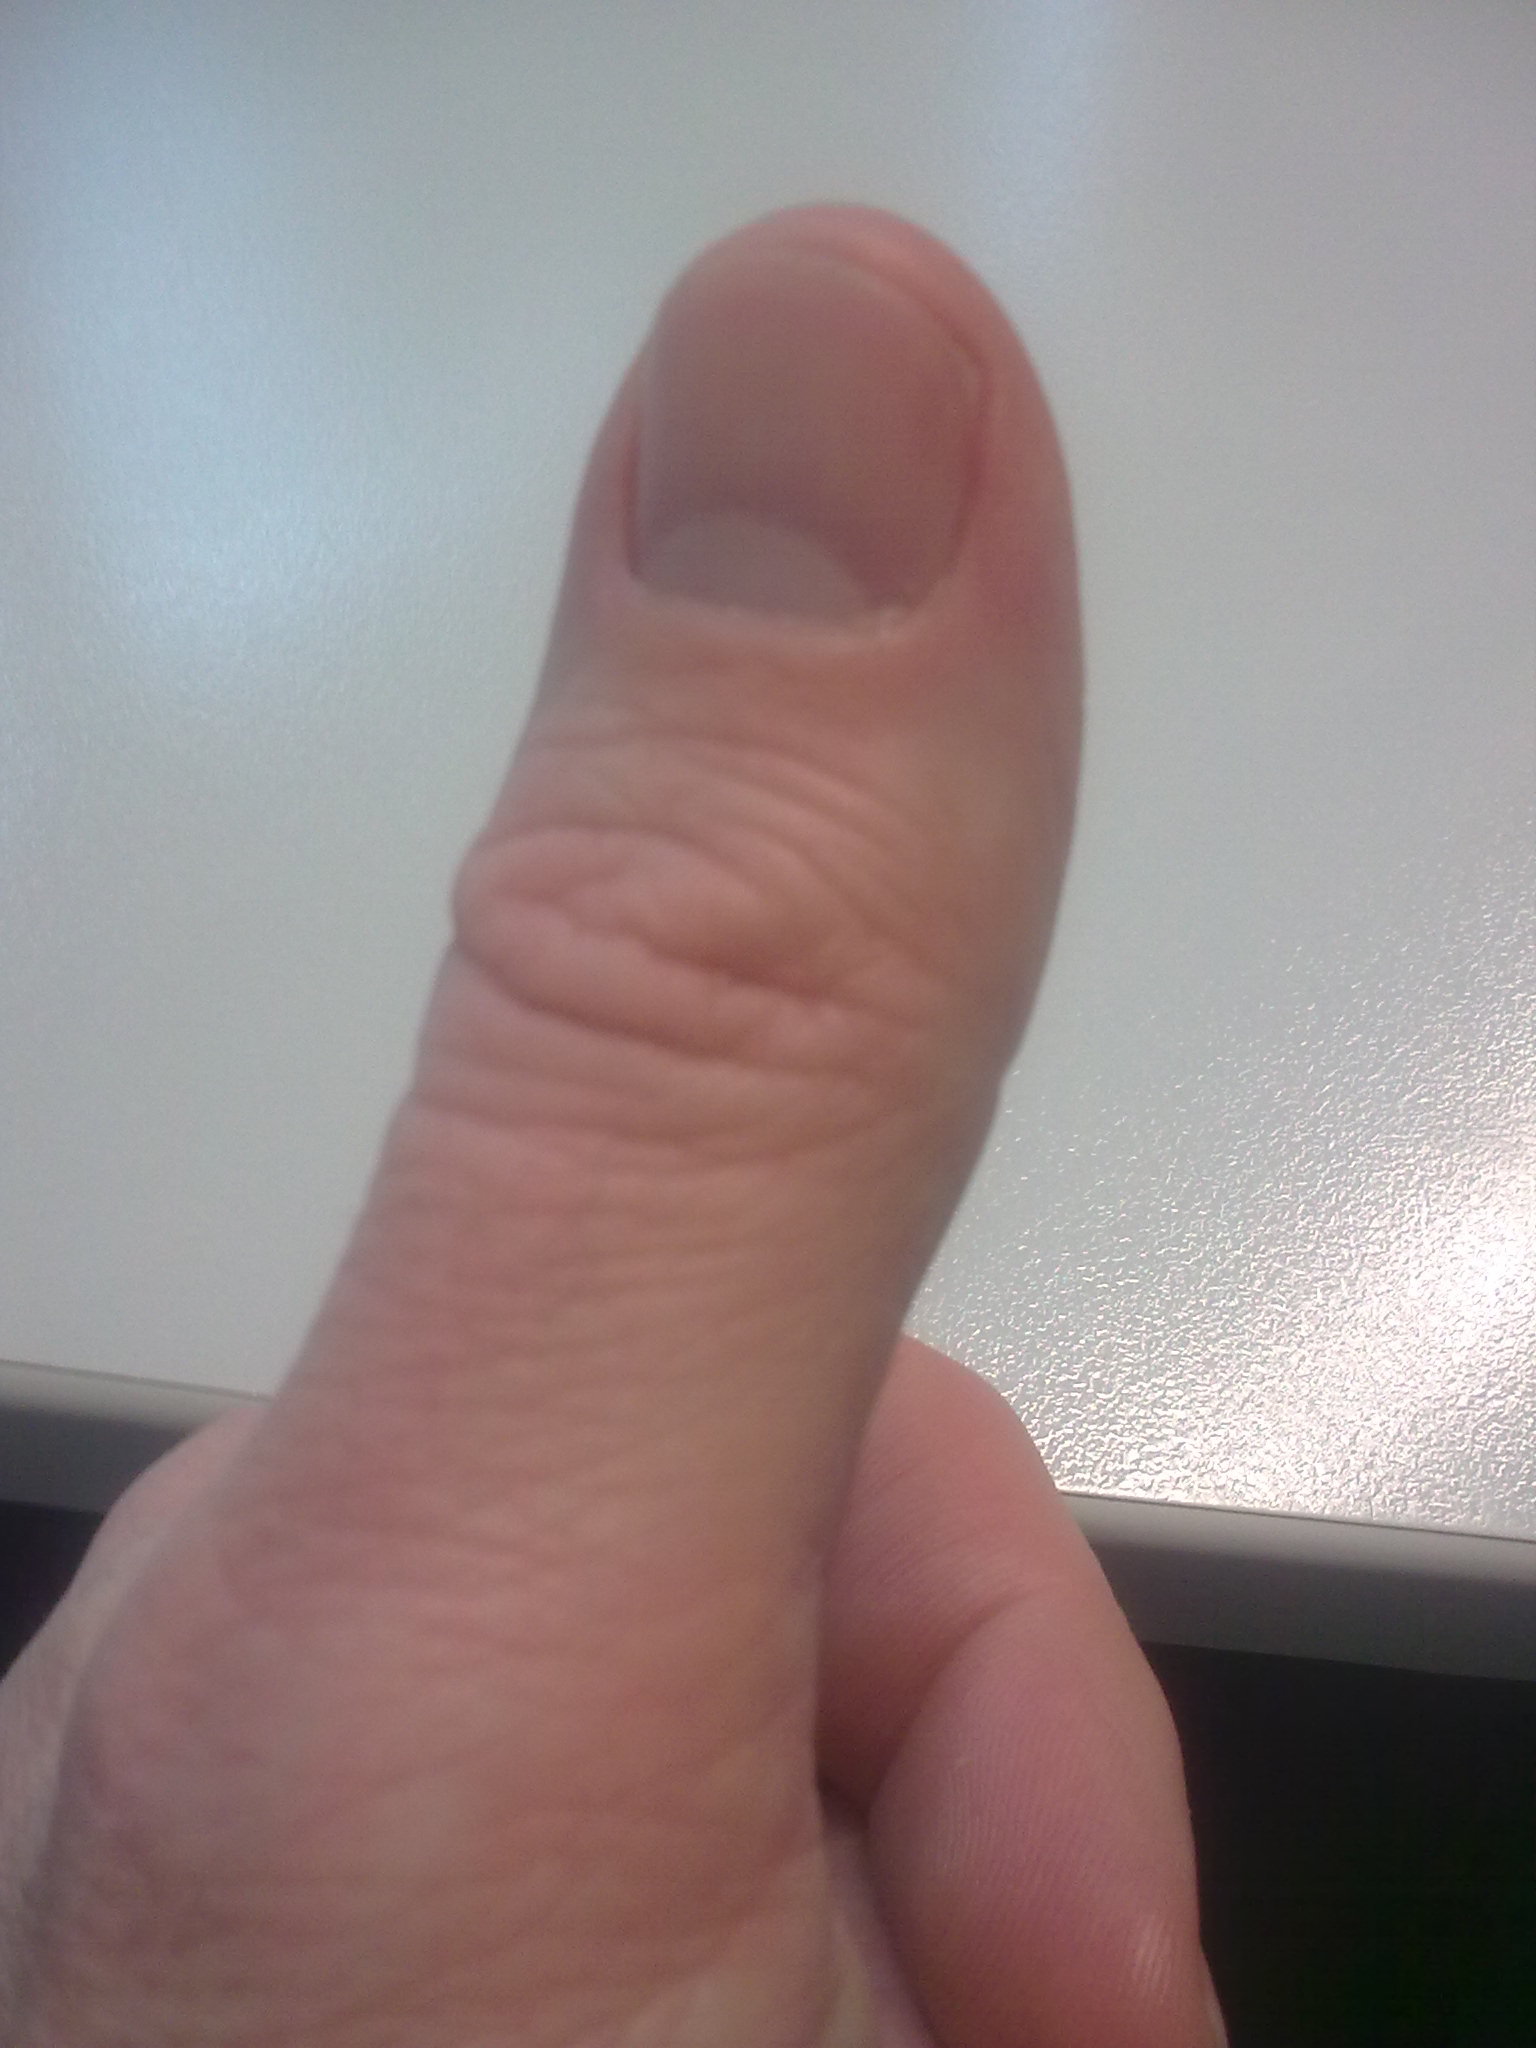 The thumb is the first digit of the hand, next to the index finger. When a person is standing in the medical anatomical position (where the palm is facing to the front), the thumb is the outermost digit. The Medical Latin English noun for thumb is pollex (compare hallux for big toe), and the corresponding adjective for thumb is pollical.

